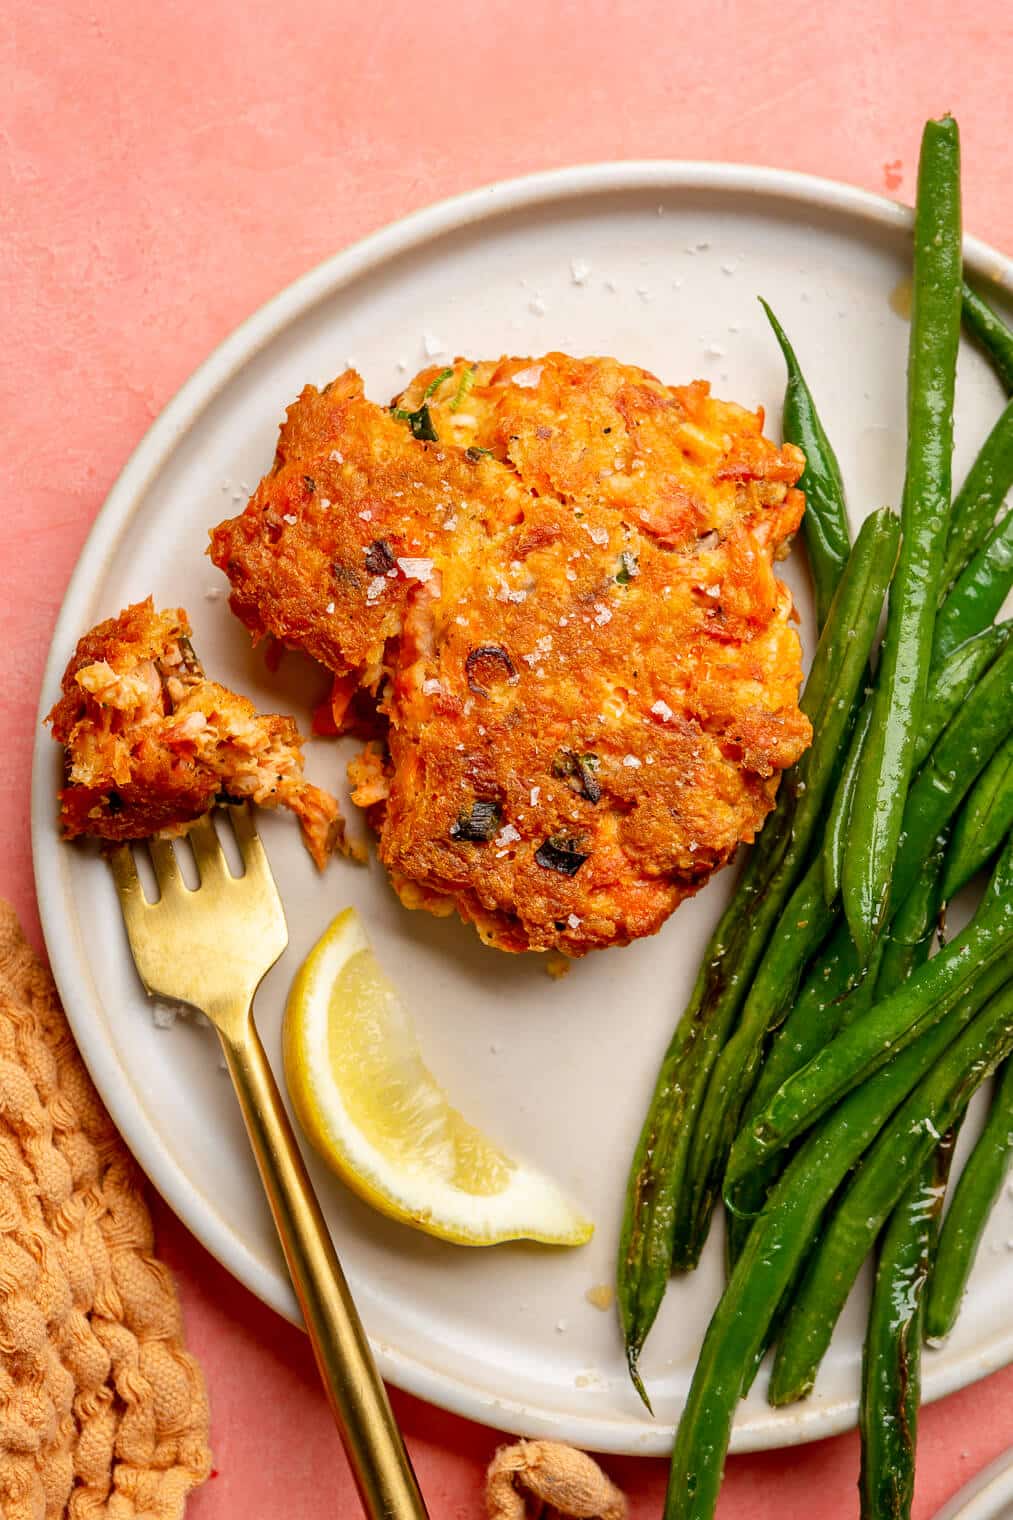 A salmon cake on a plate next to a lemon wedge and a serving of sauteed green beans.